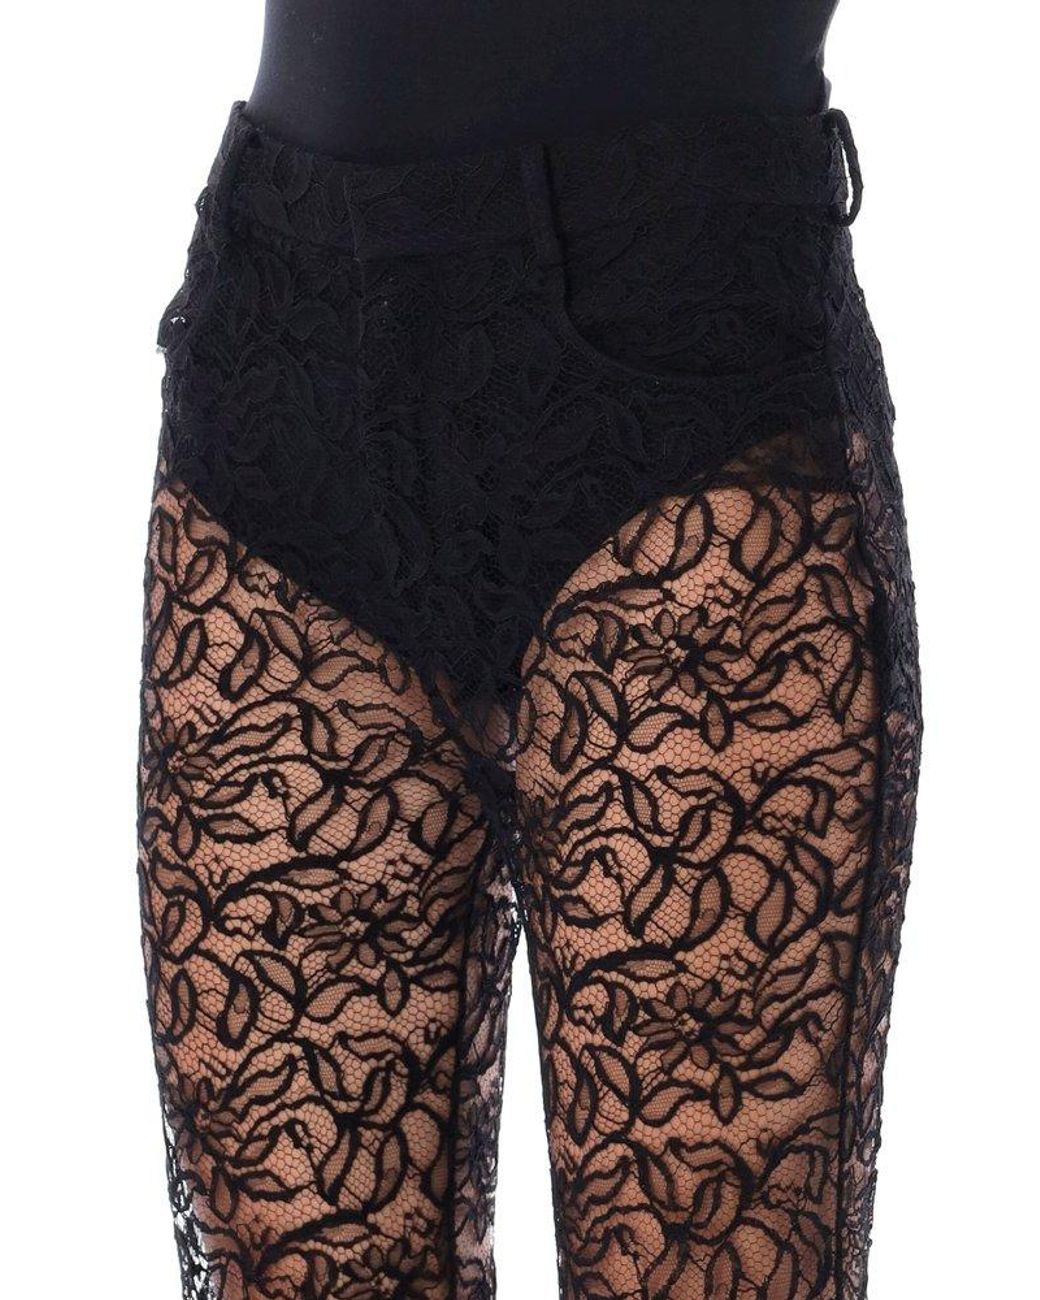 LoveMyStyle Black Lace/Nude Straight Leg Trousers